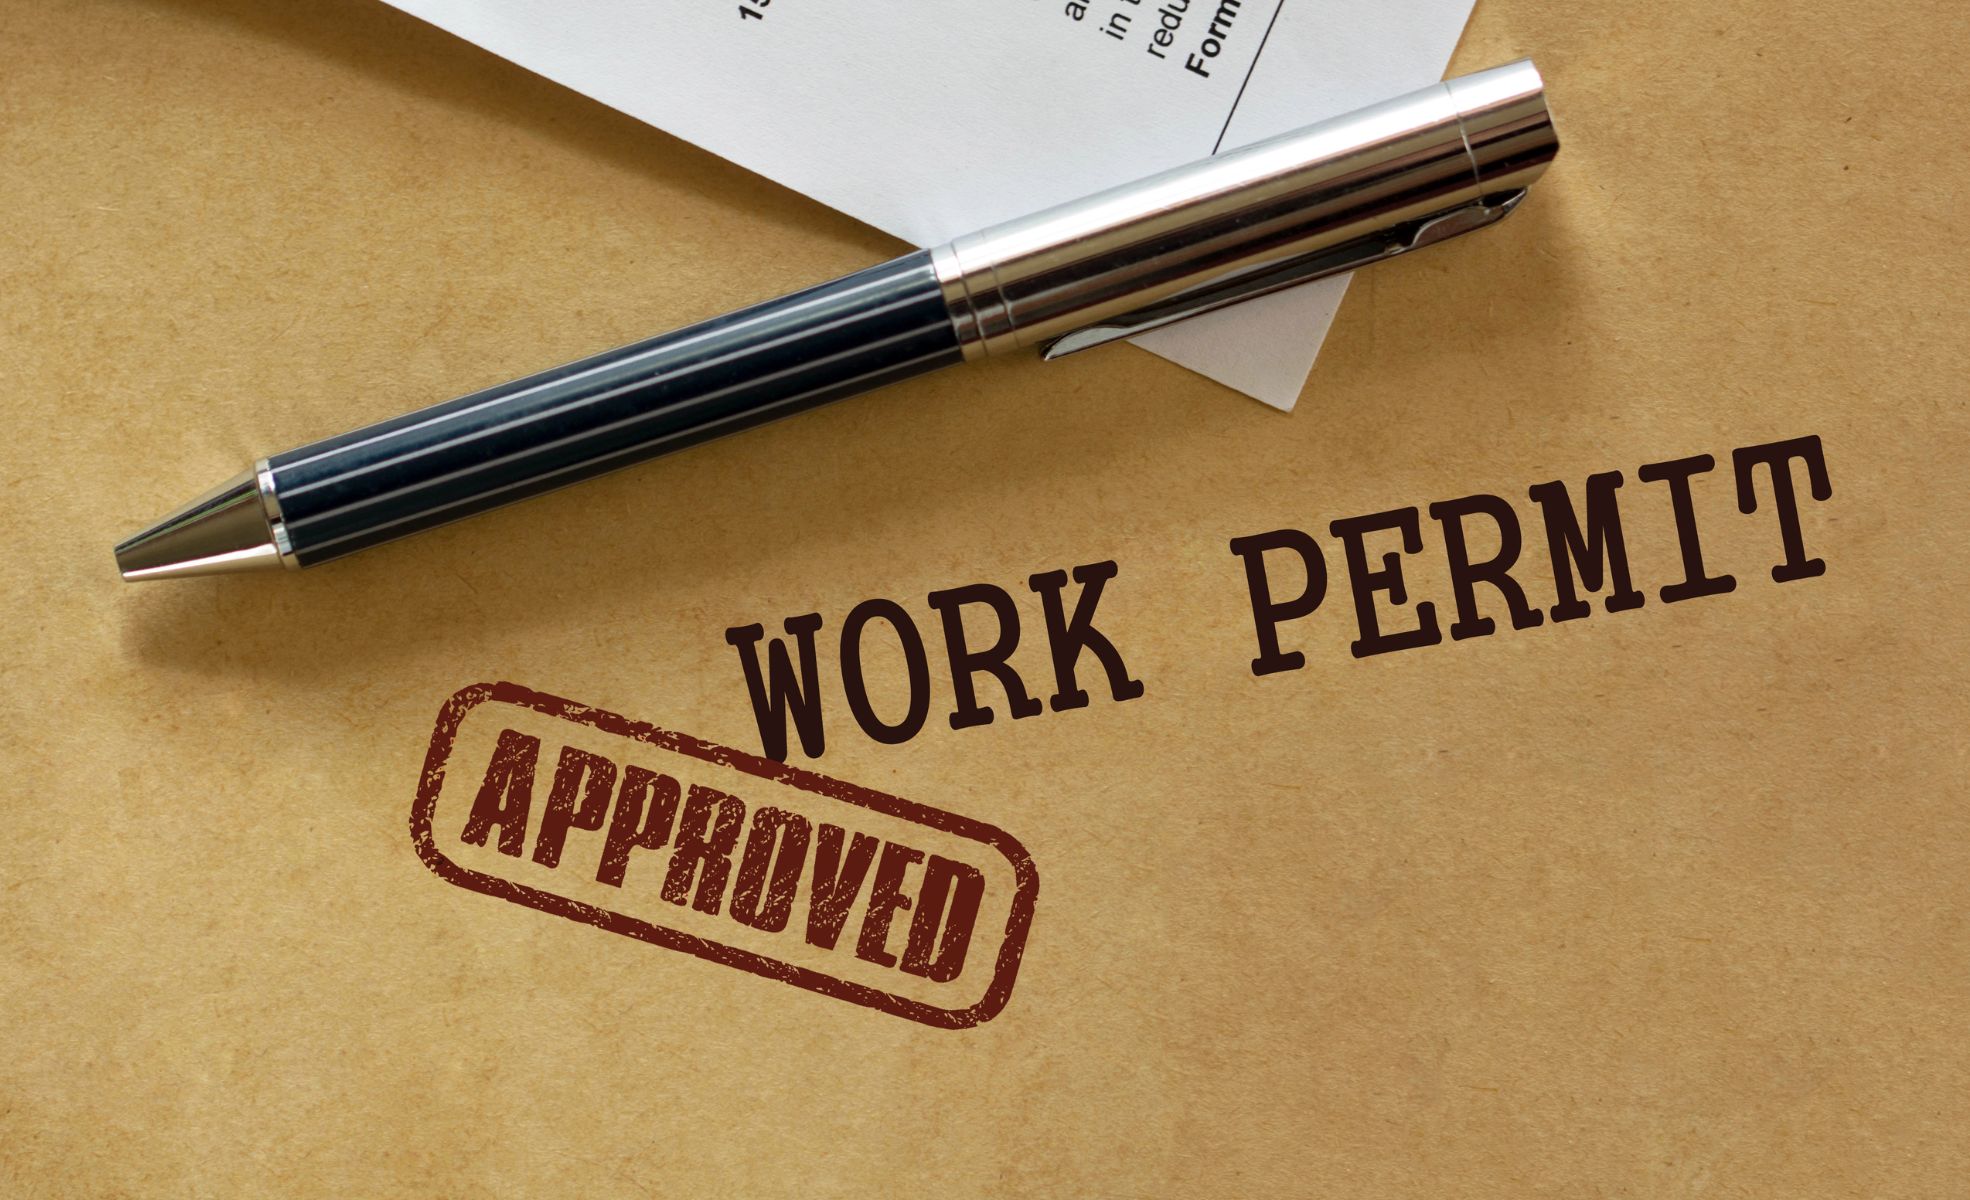 Work Permit Approval On Paper